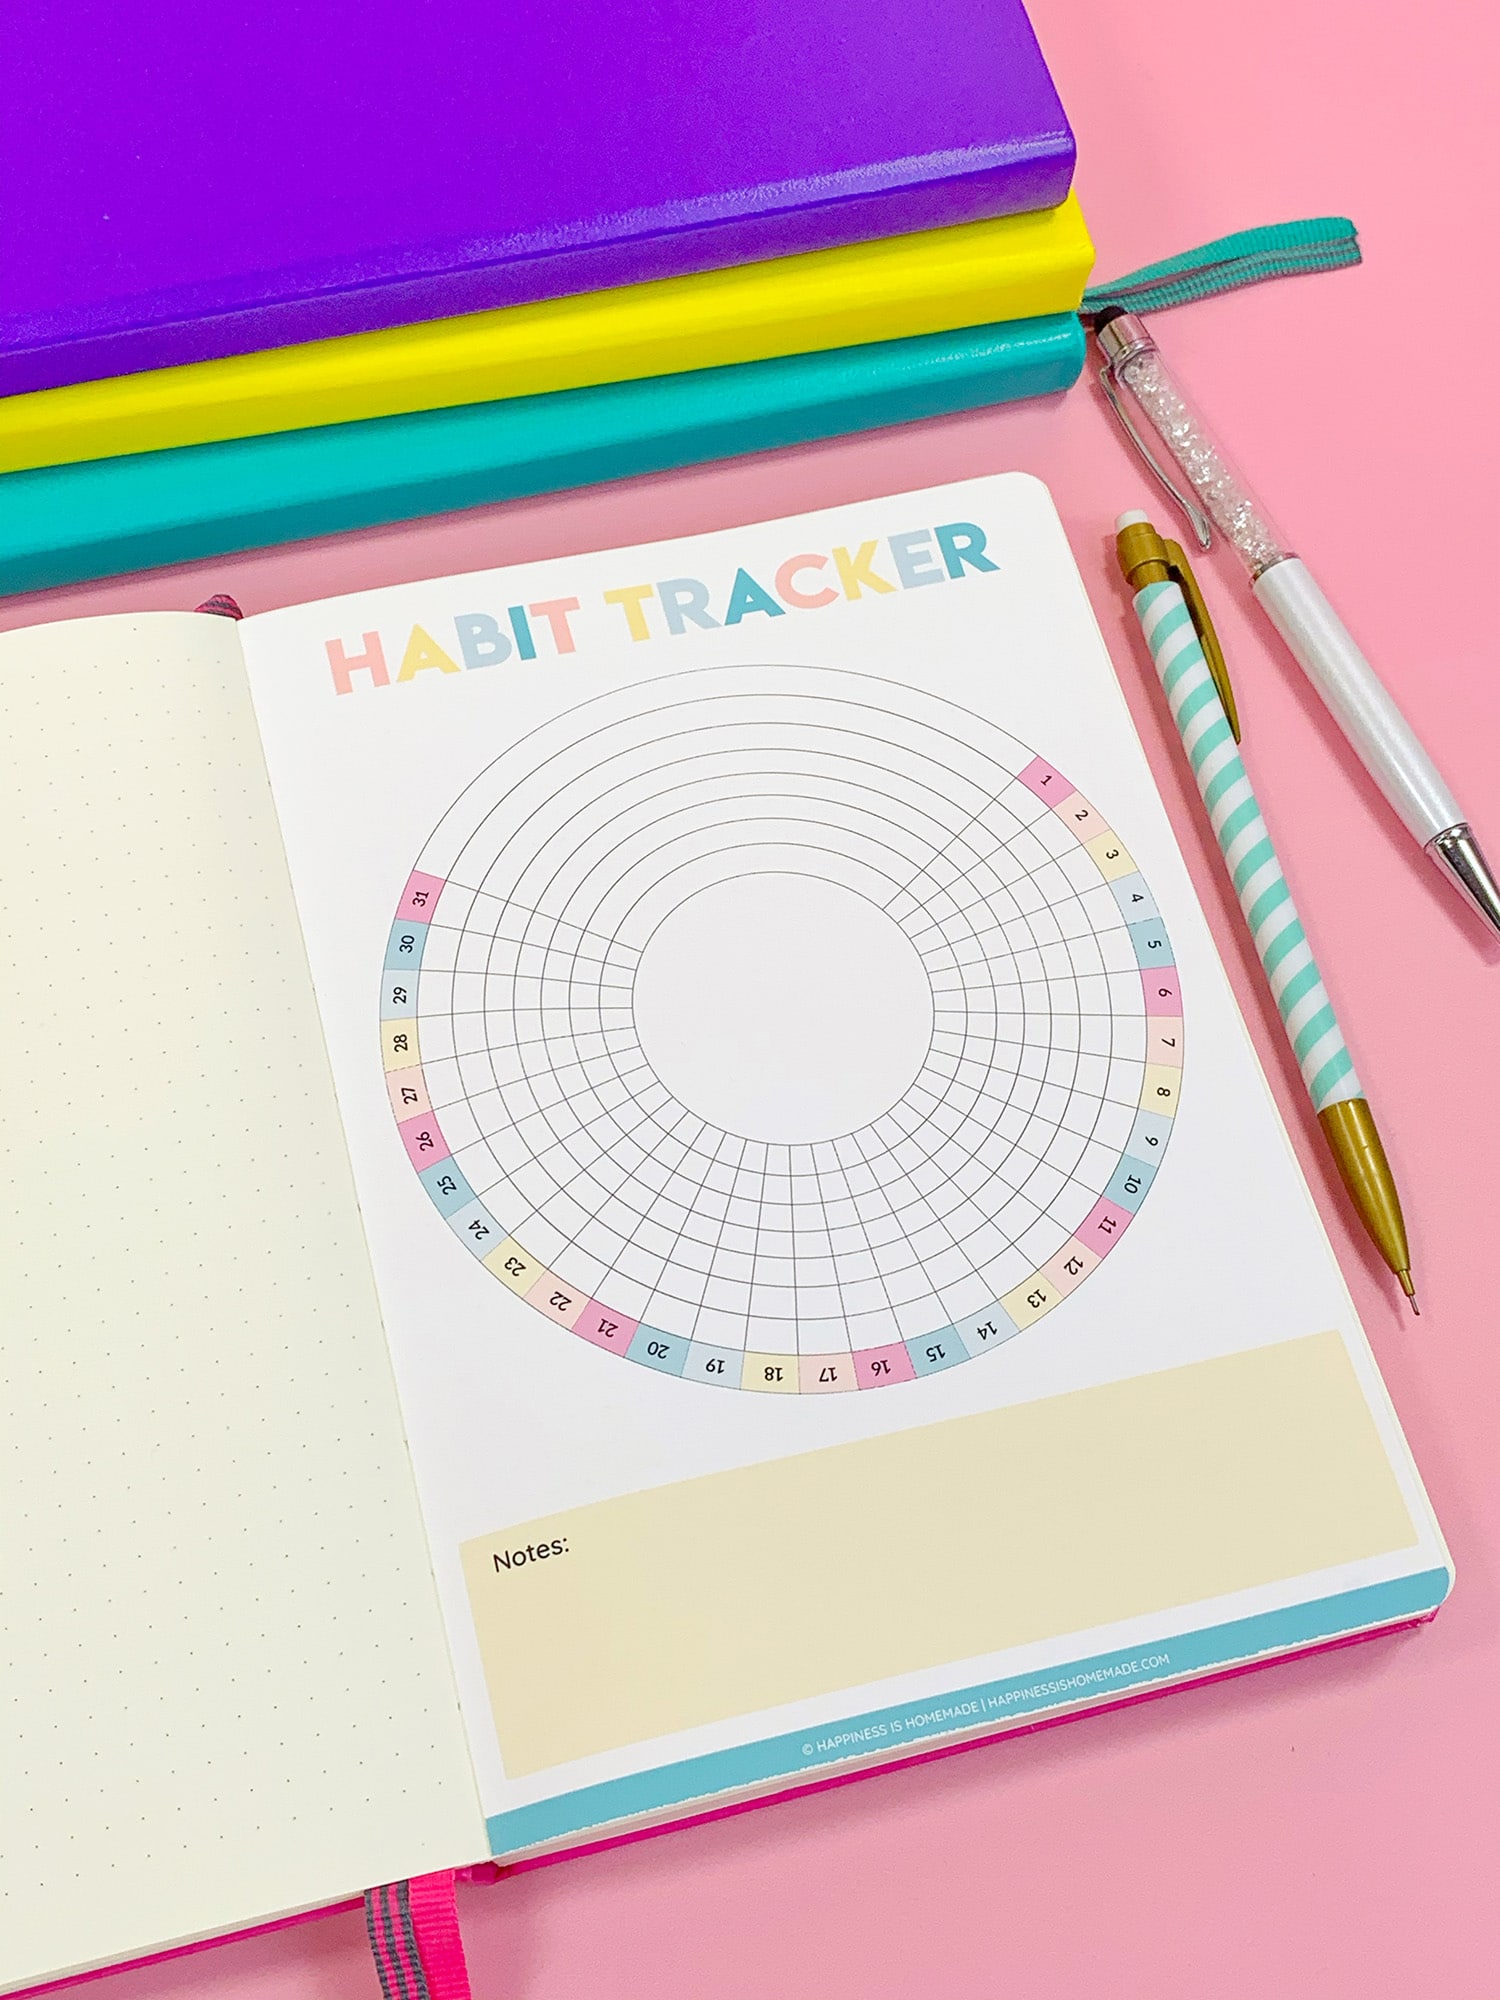 Freebie} Habit tracker stickers for your planner - Lovely Planner